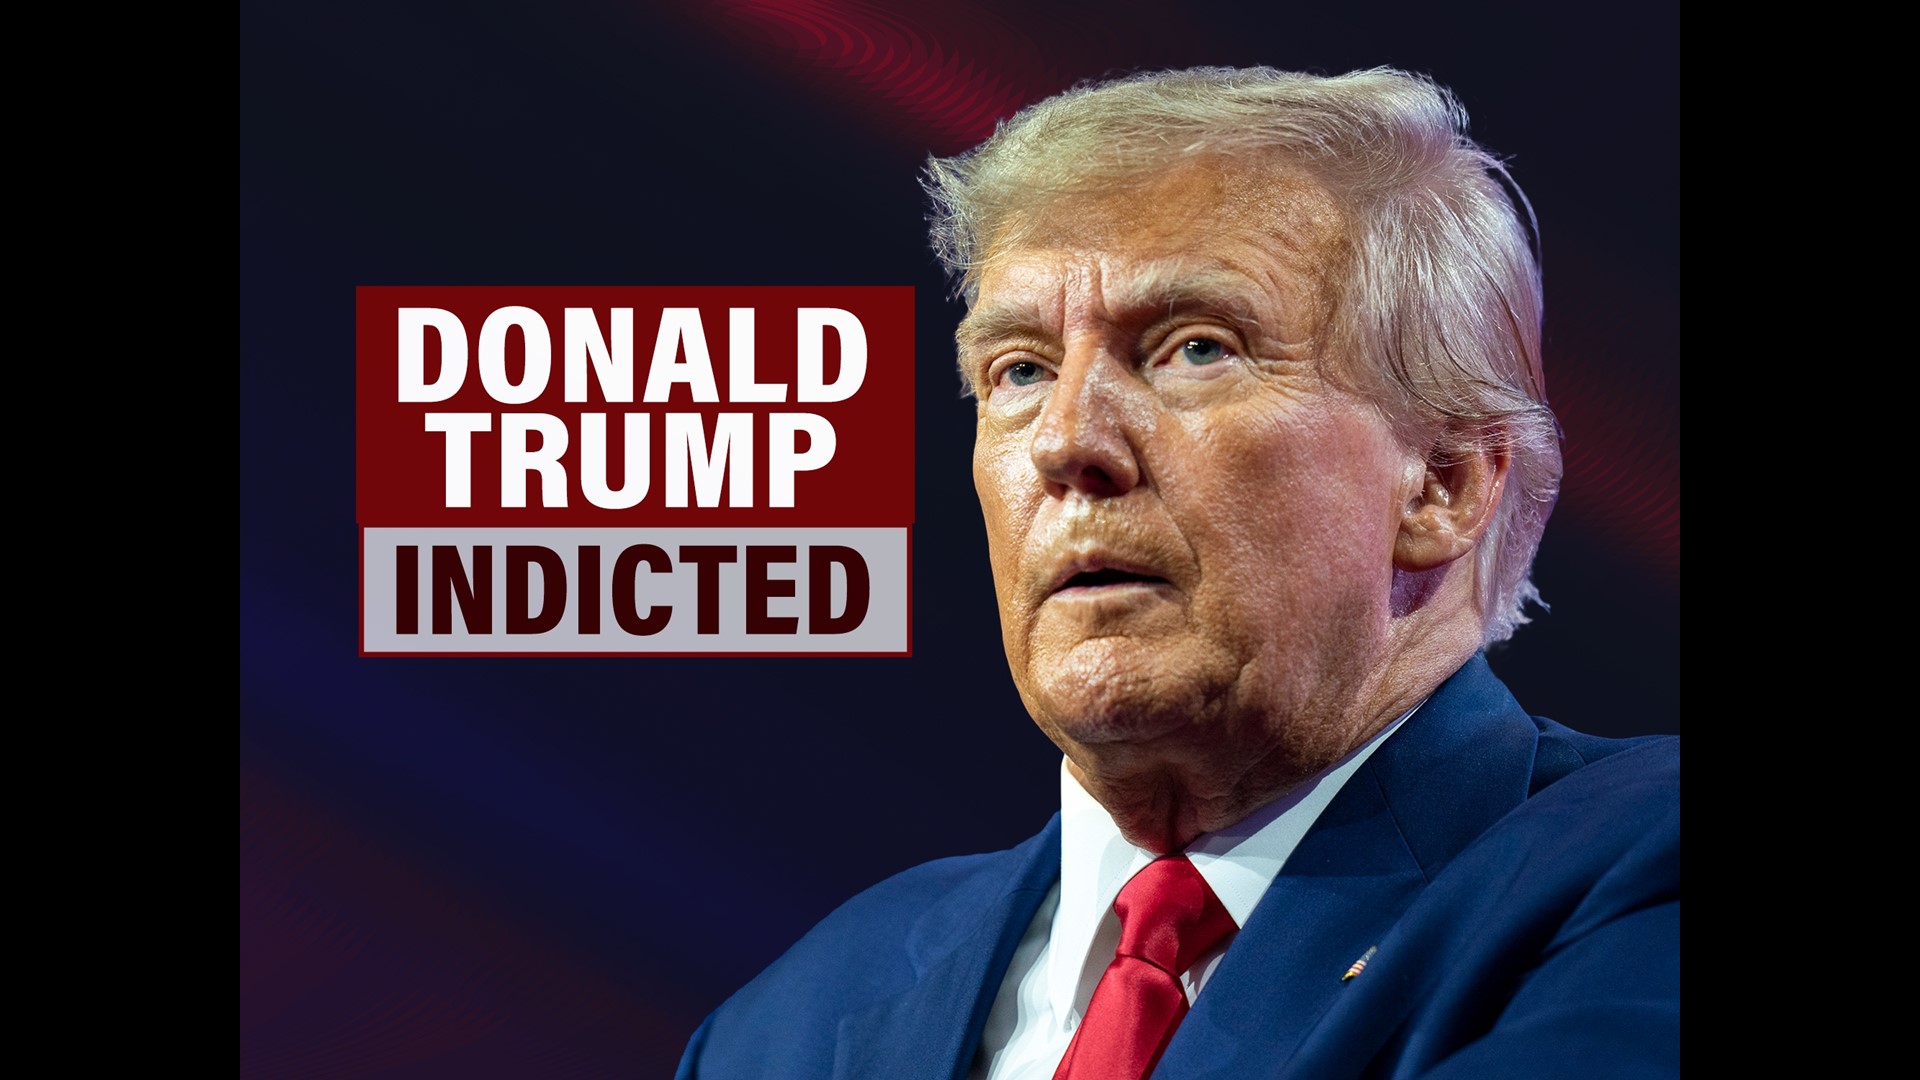 Trump was indicted by a Manhattan grand jury after an investigation into payments made during his 2016 presidential campaign.